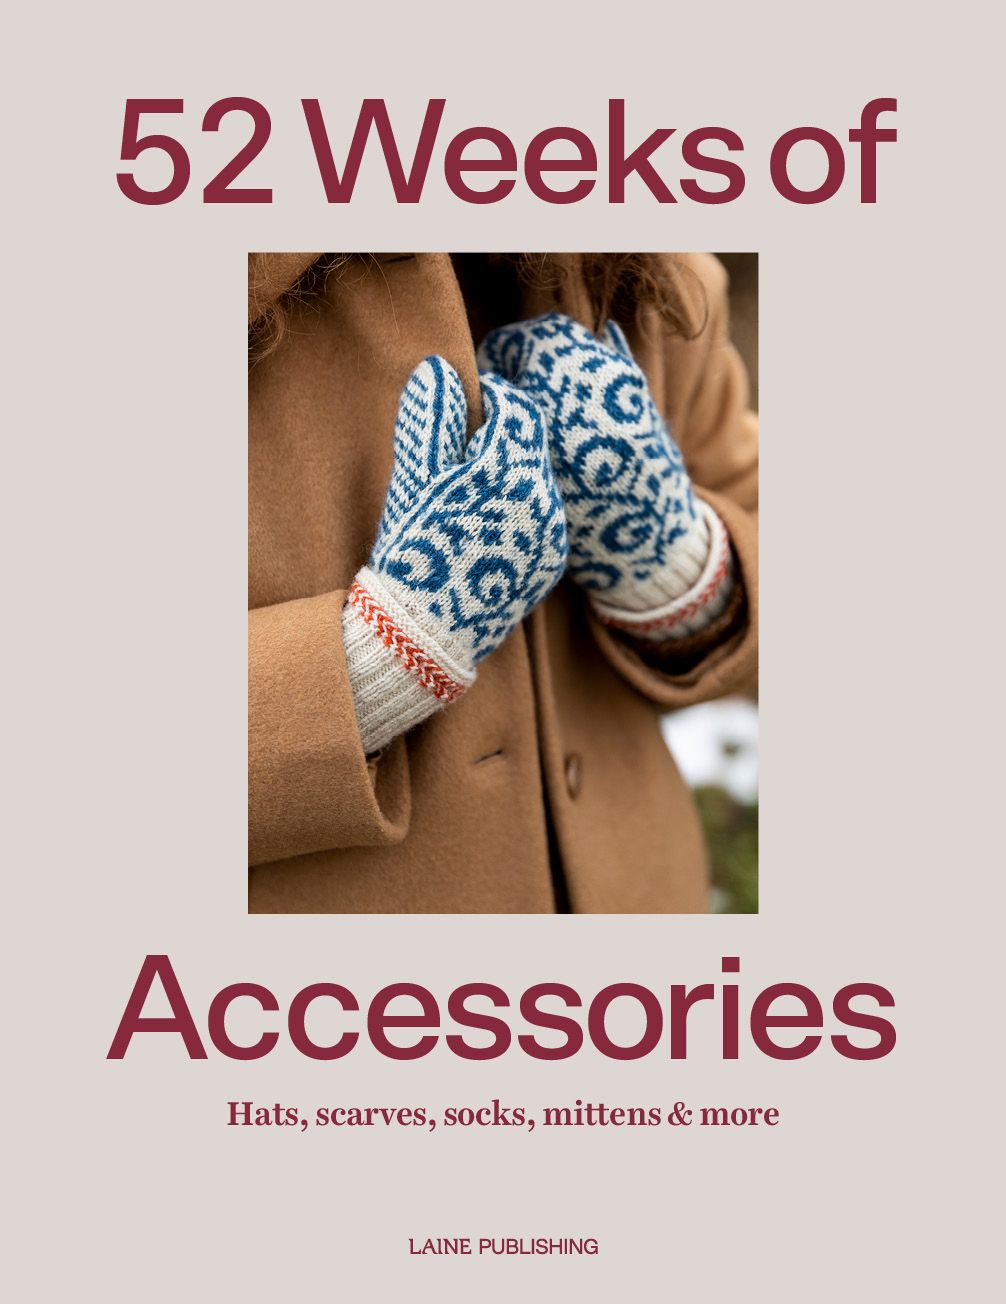 52 Weeks of Accessories from Laine Publishing